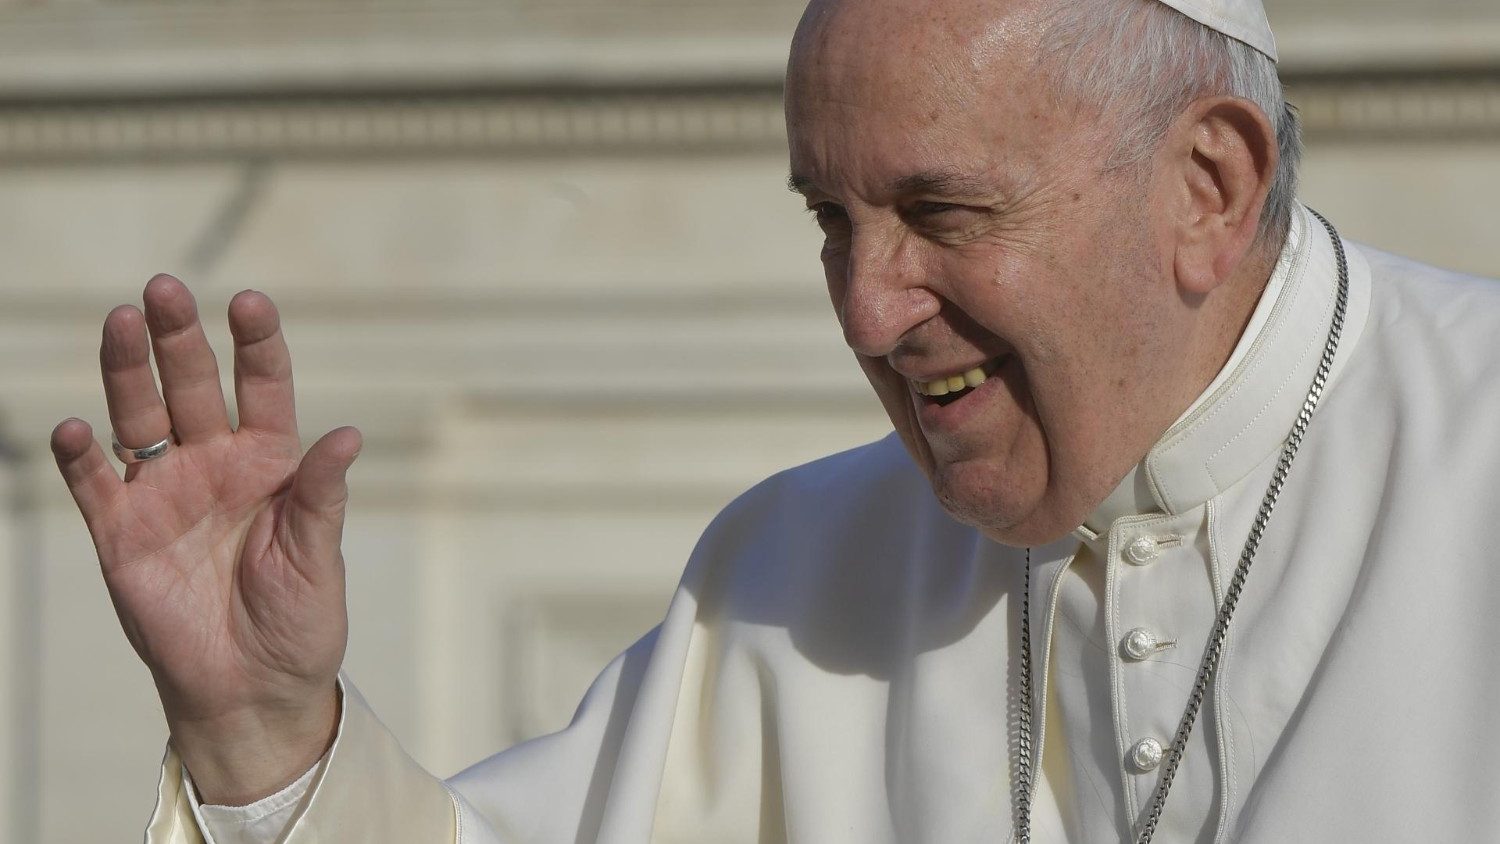 Pope Francis encourages lay people to value community, reach out to others